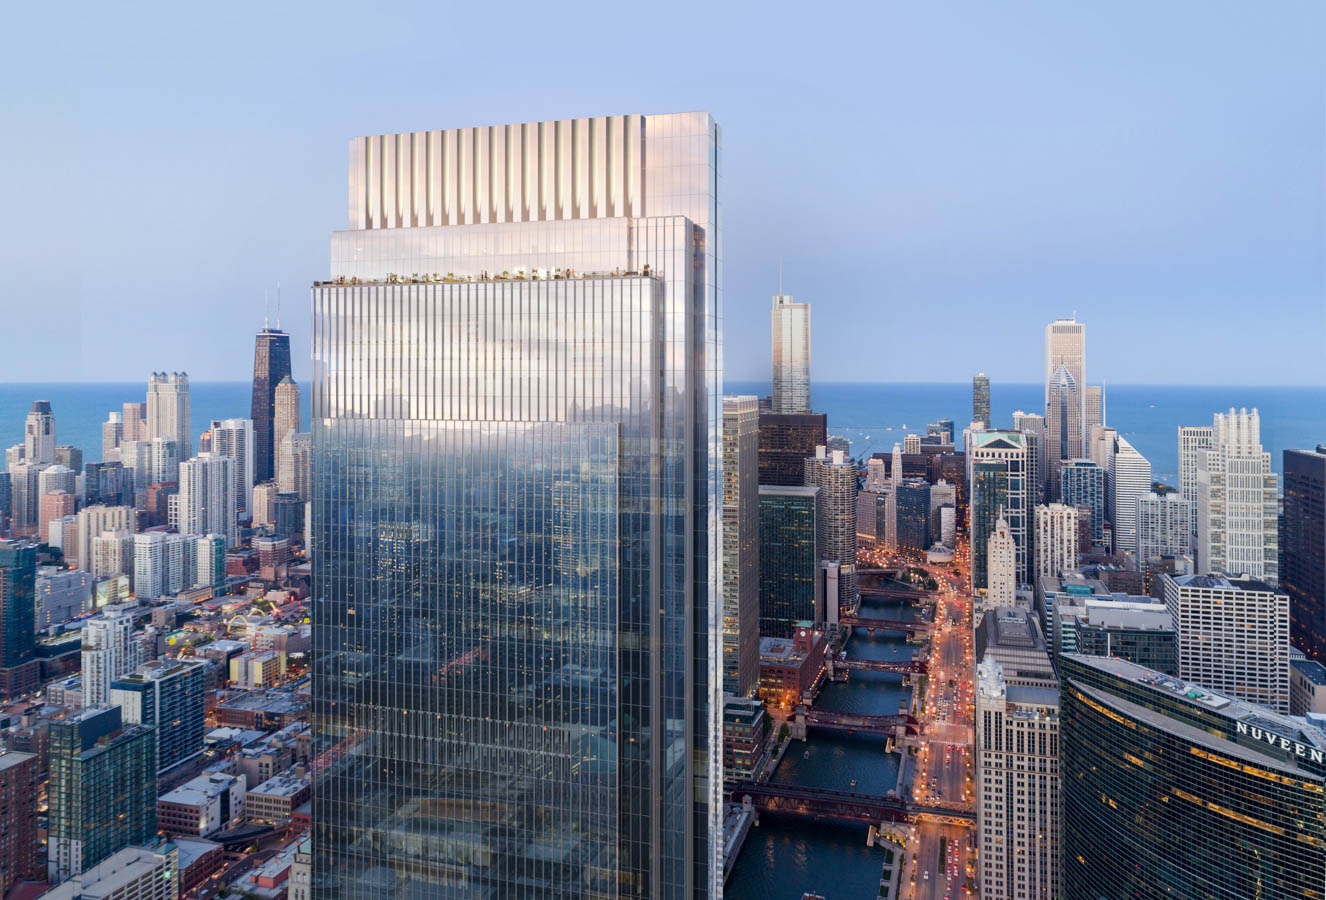 Rendering of Wolf Point South. Rendering courtesy of Pelli Clarke Pelli Architects